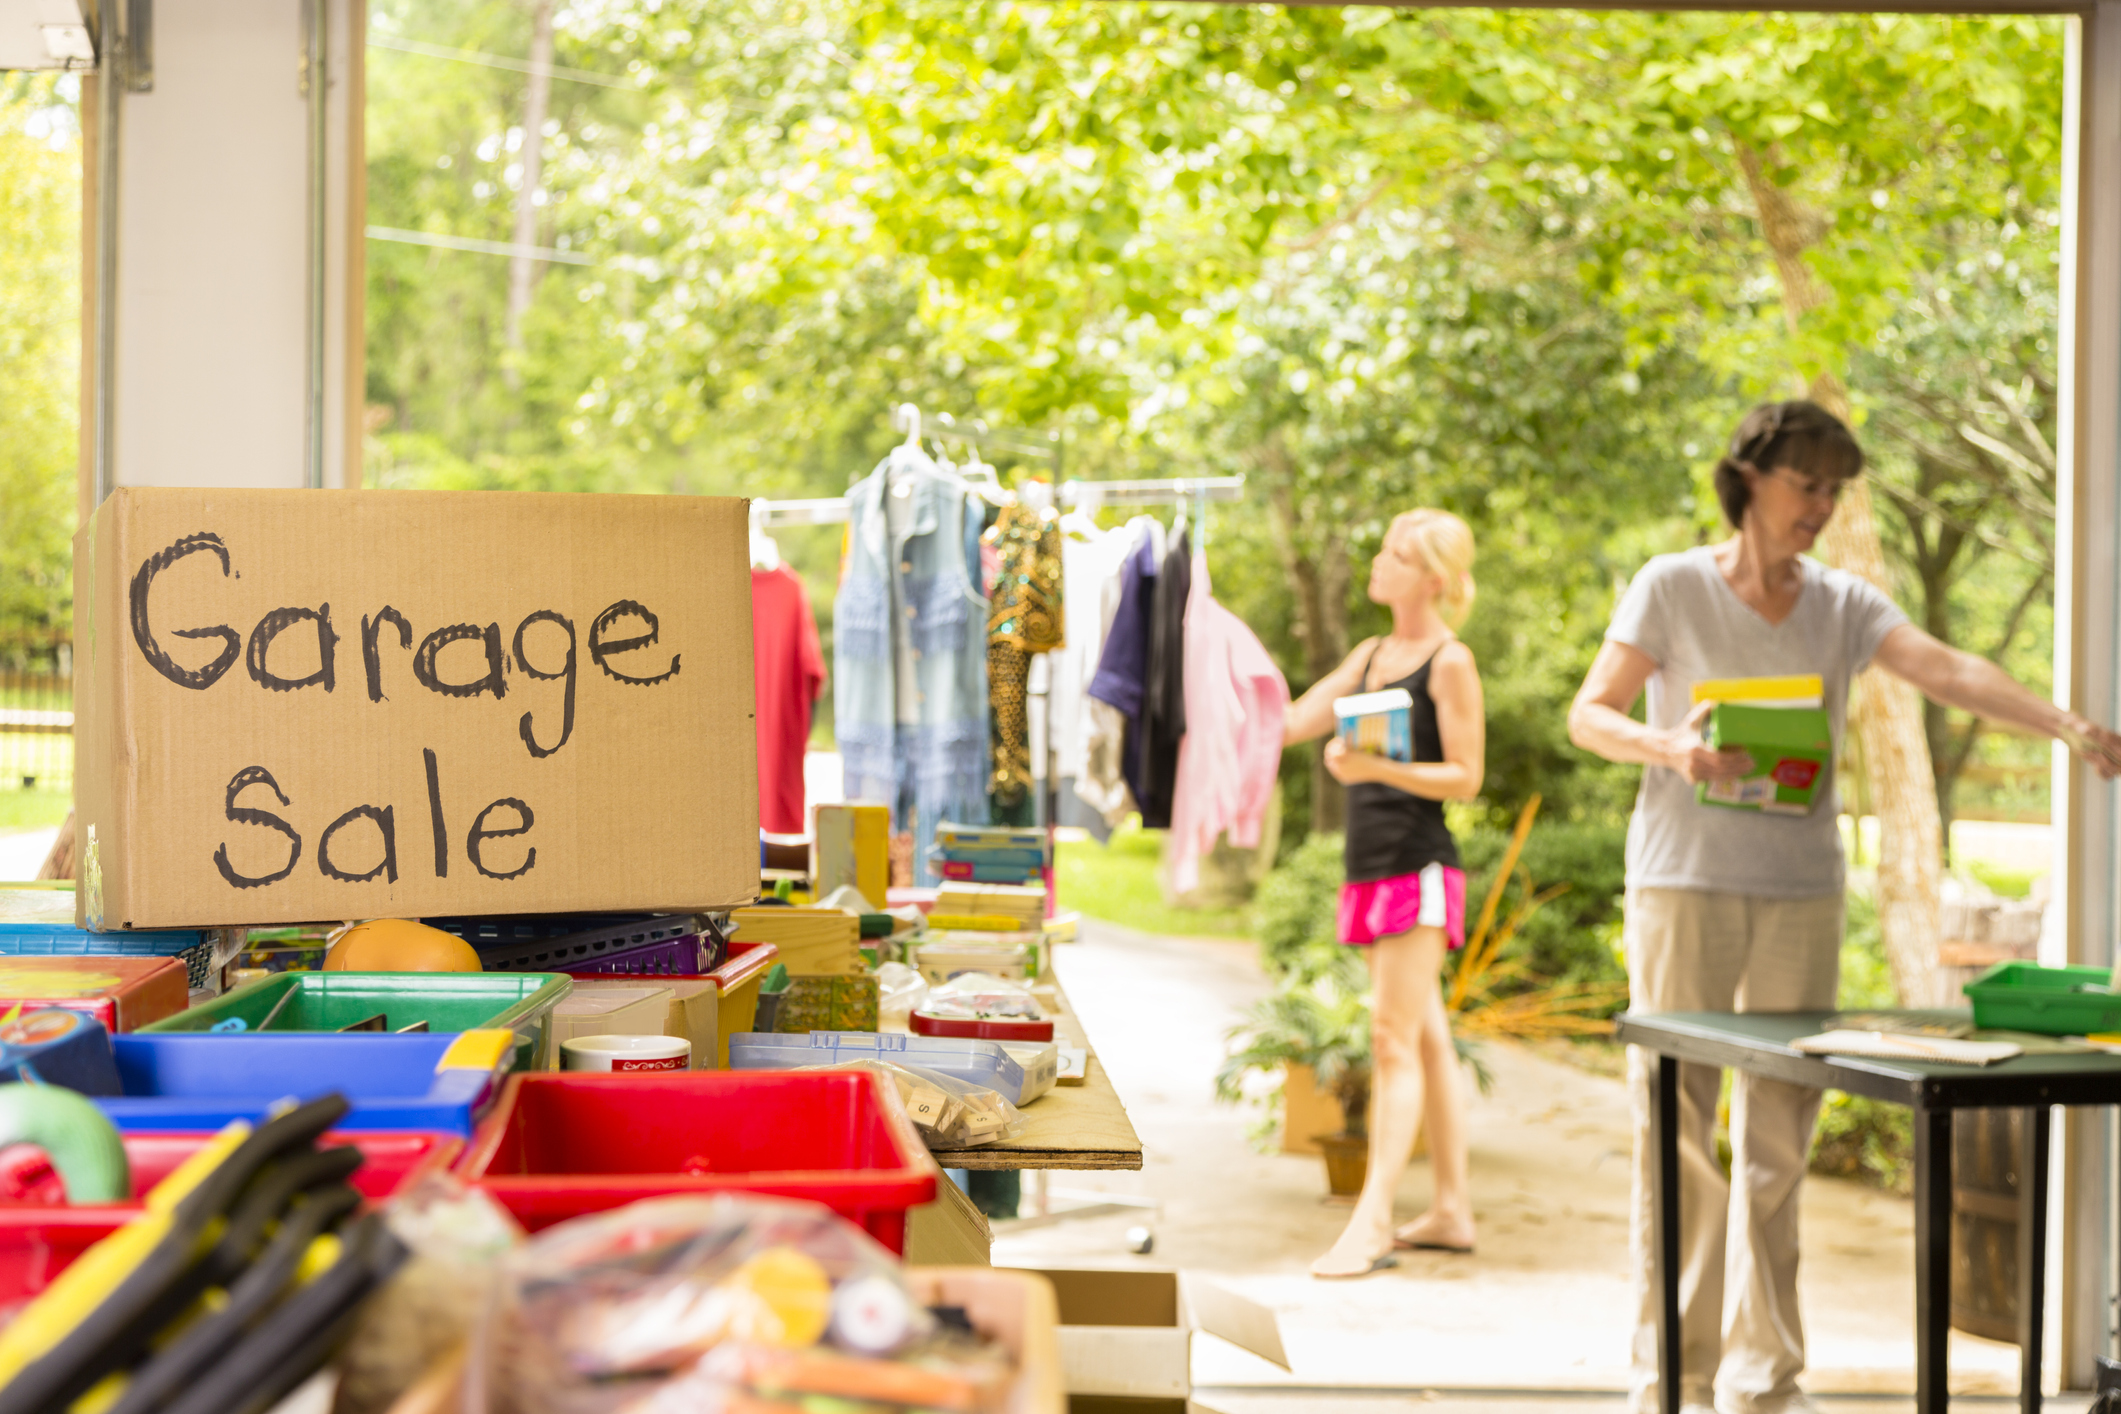 Here Comes the Sun: Planning A Summer Garage Sale Before A Move